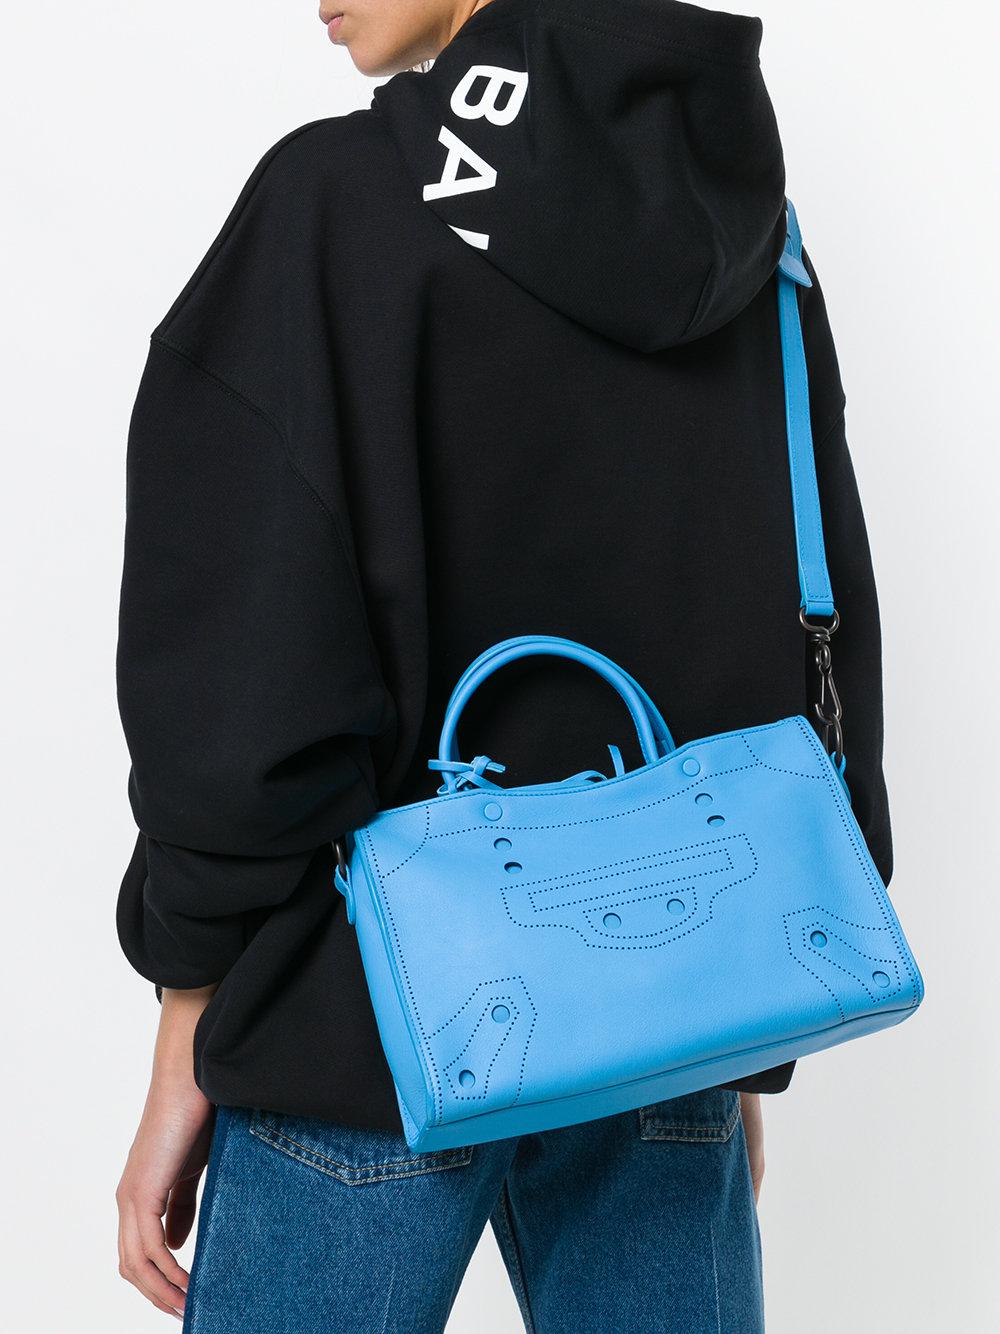 Balenciaga Leather Blackout City Small Bag in Blue - Lyst